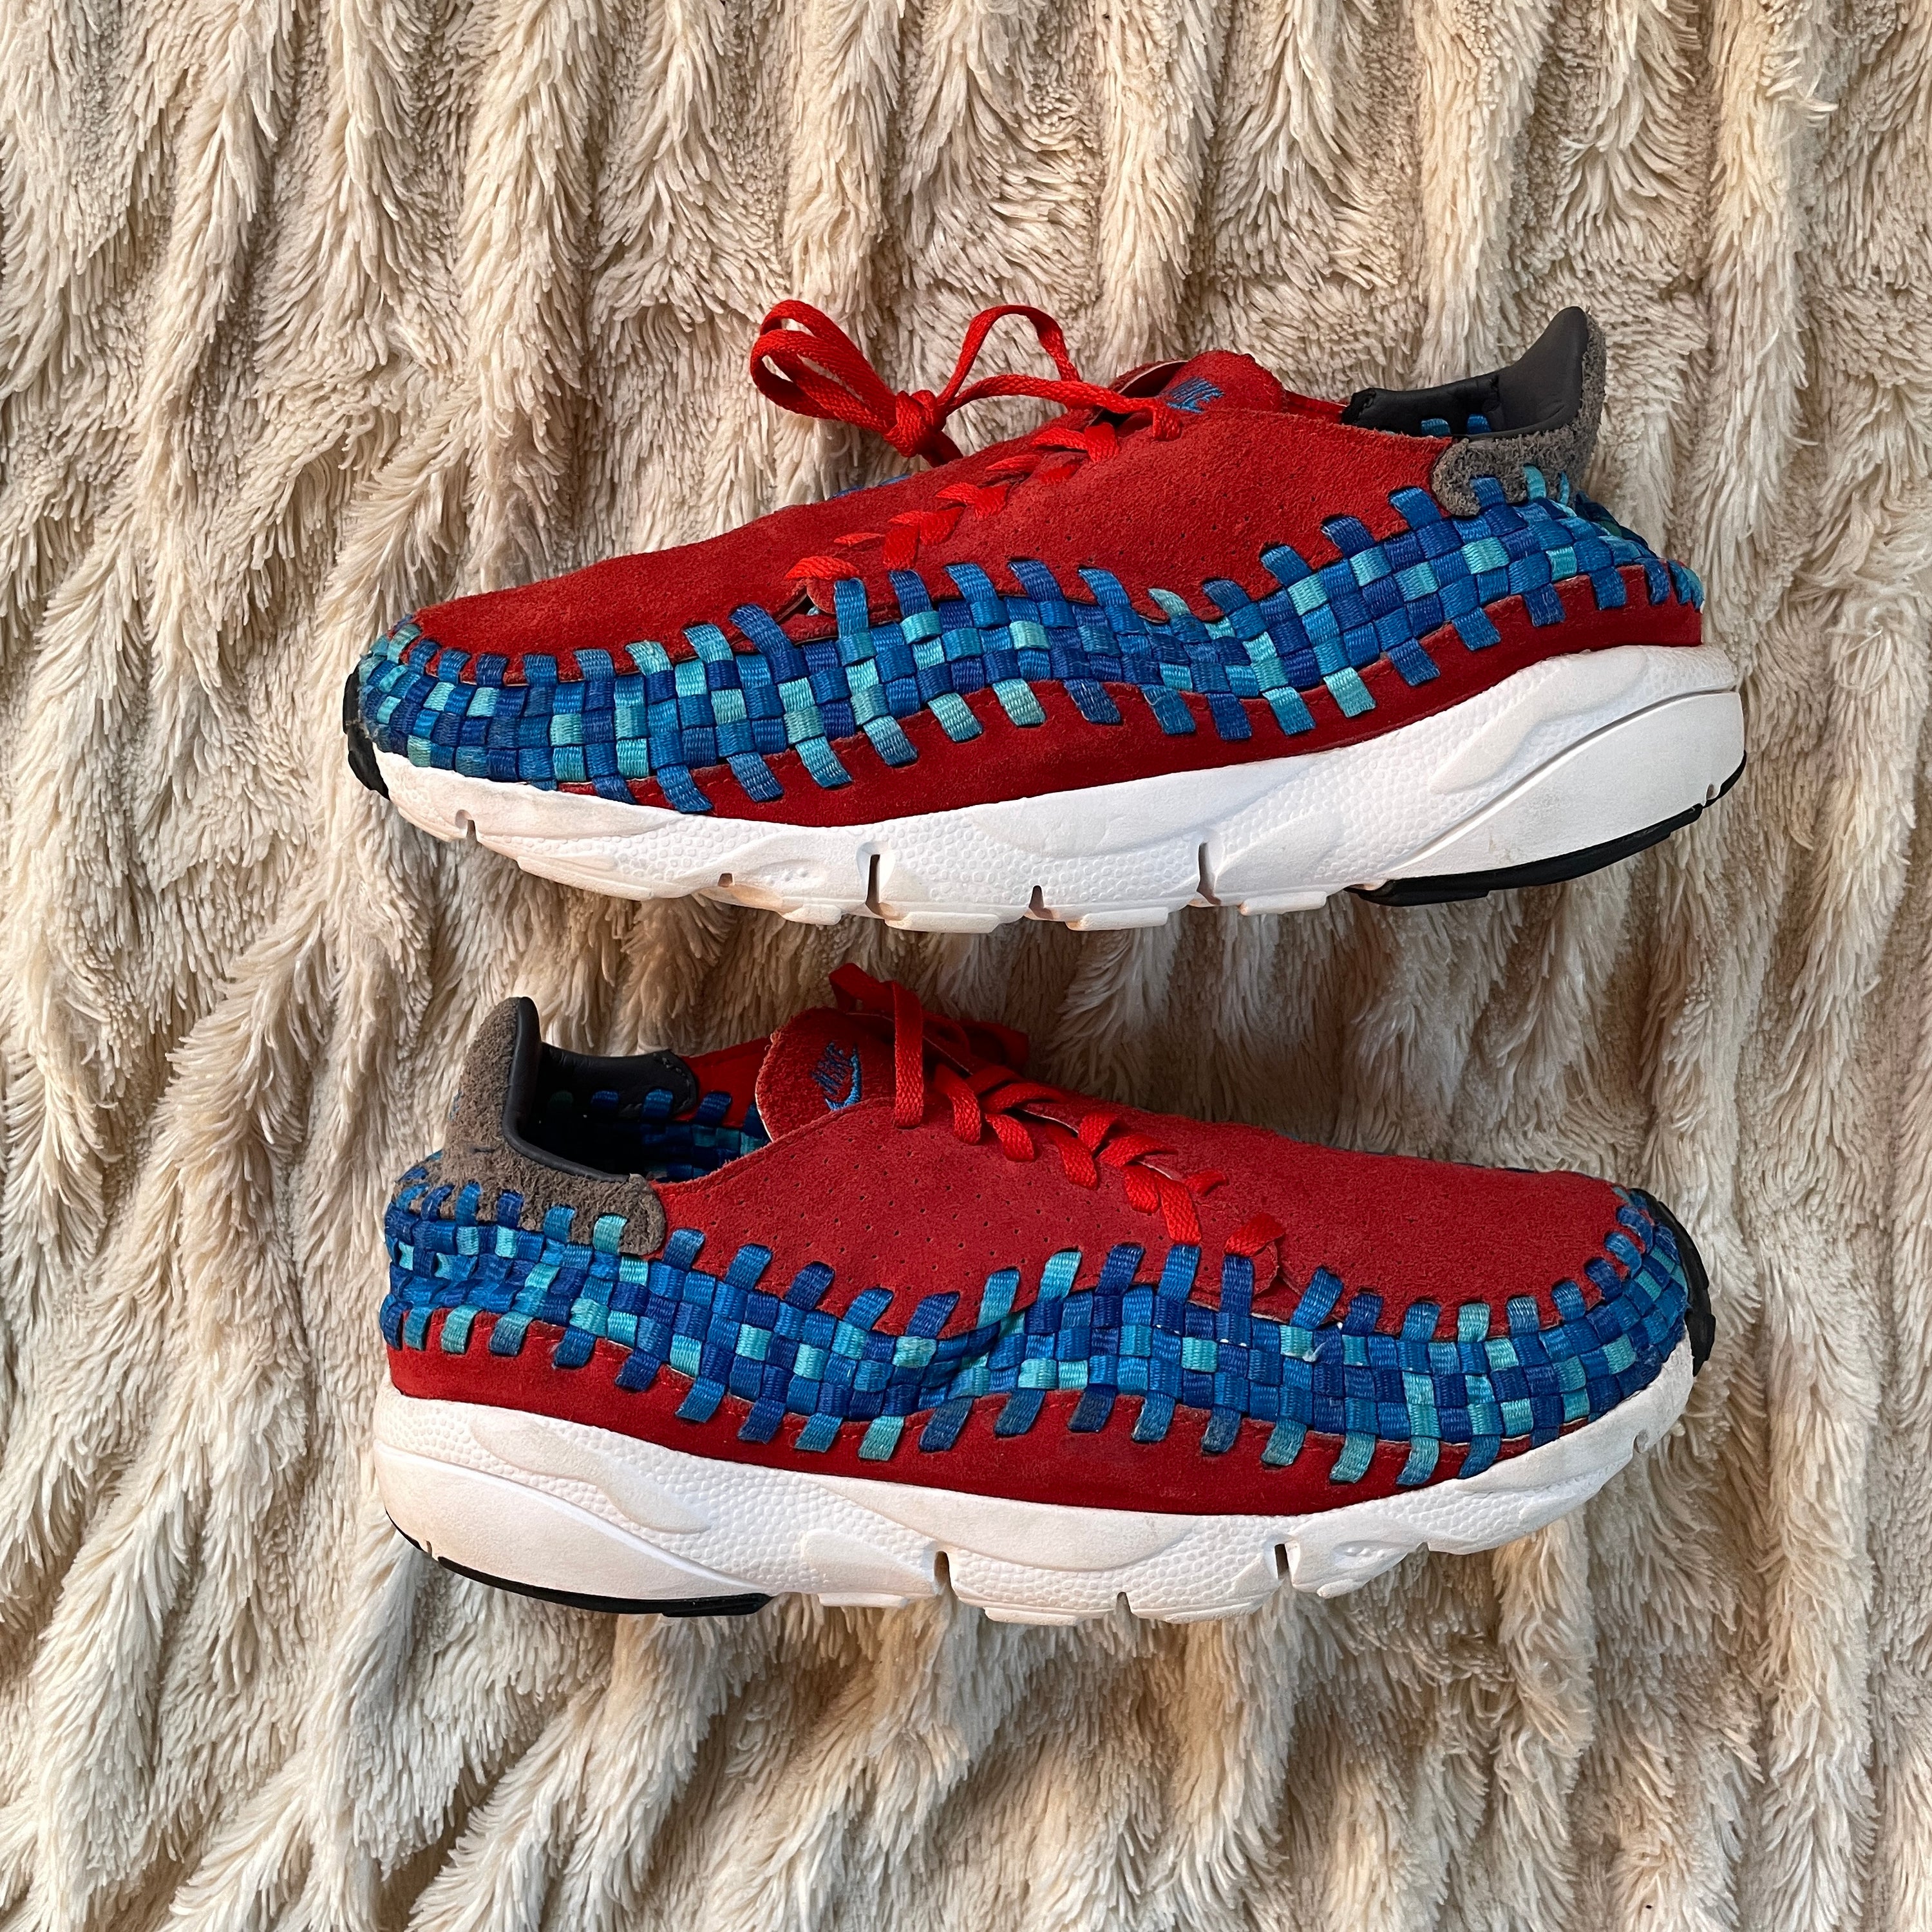 US 11 - NIKE AIR FOOTSCAPE WOVEN MOTION "RED BLUE SUEDE" [2013]